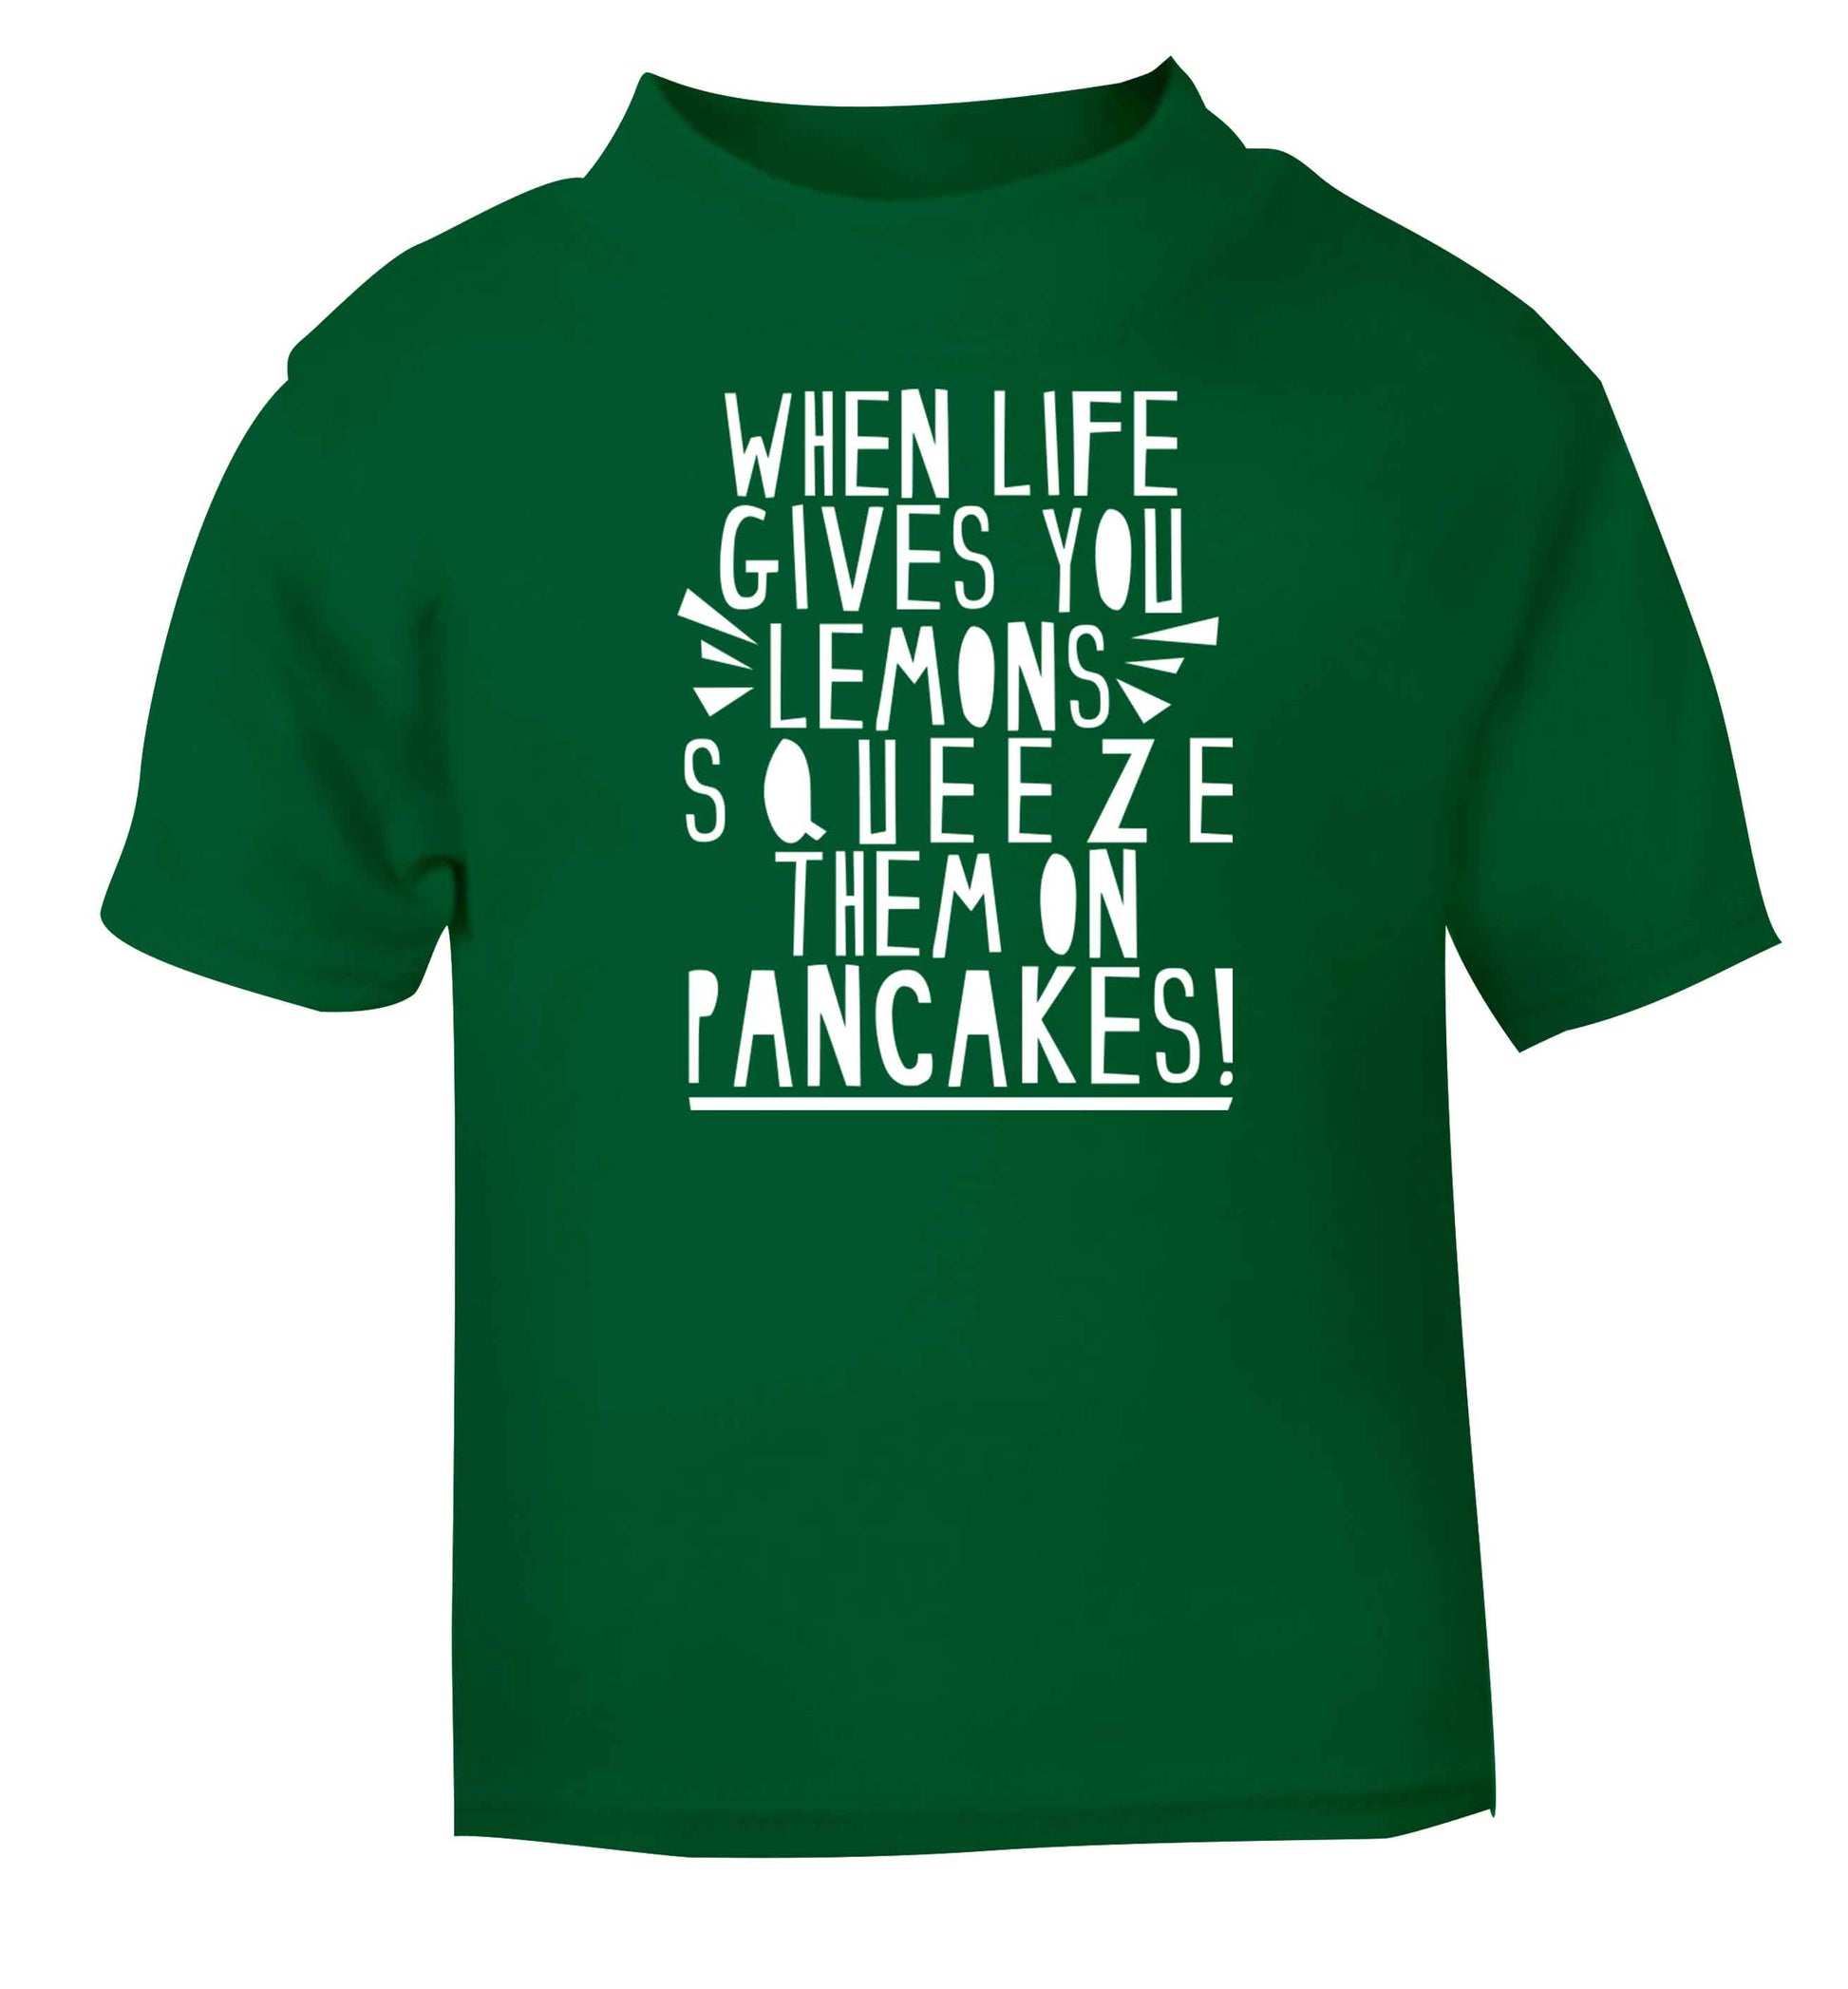 When life gives you lemons squeeze them on pancakes! green baby toddler Tshirt 2 Years